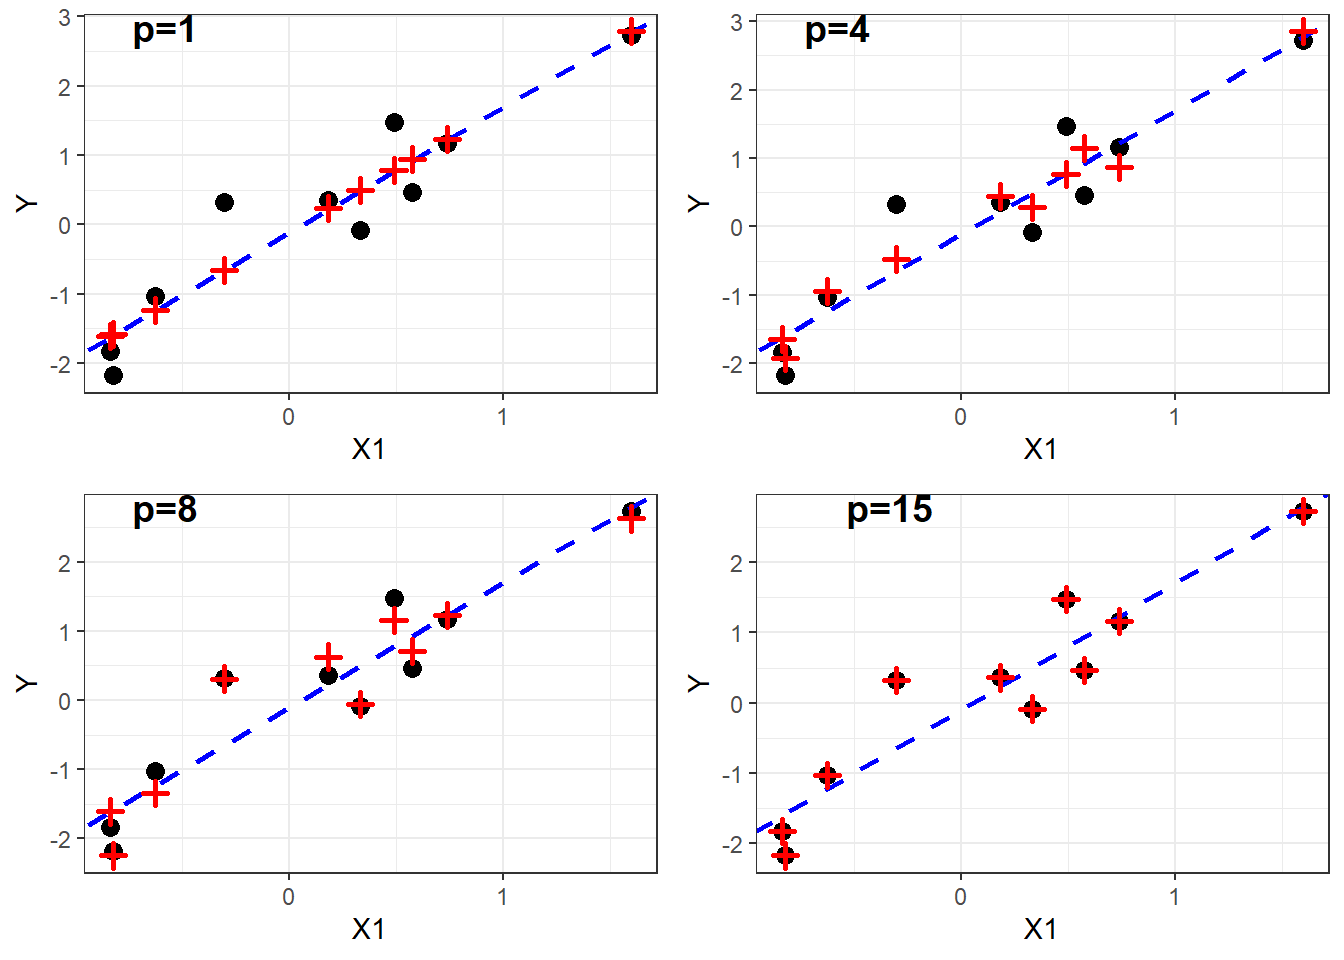 Observed and fitted values for models with increasing $p$.